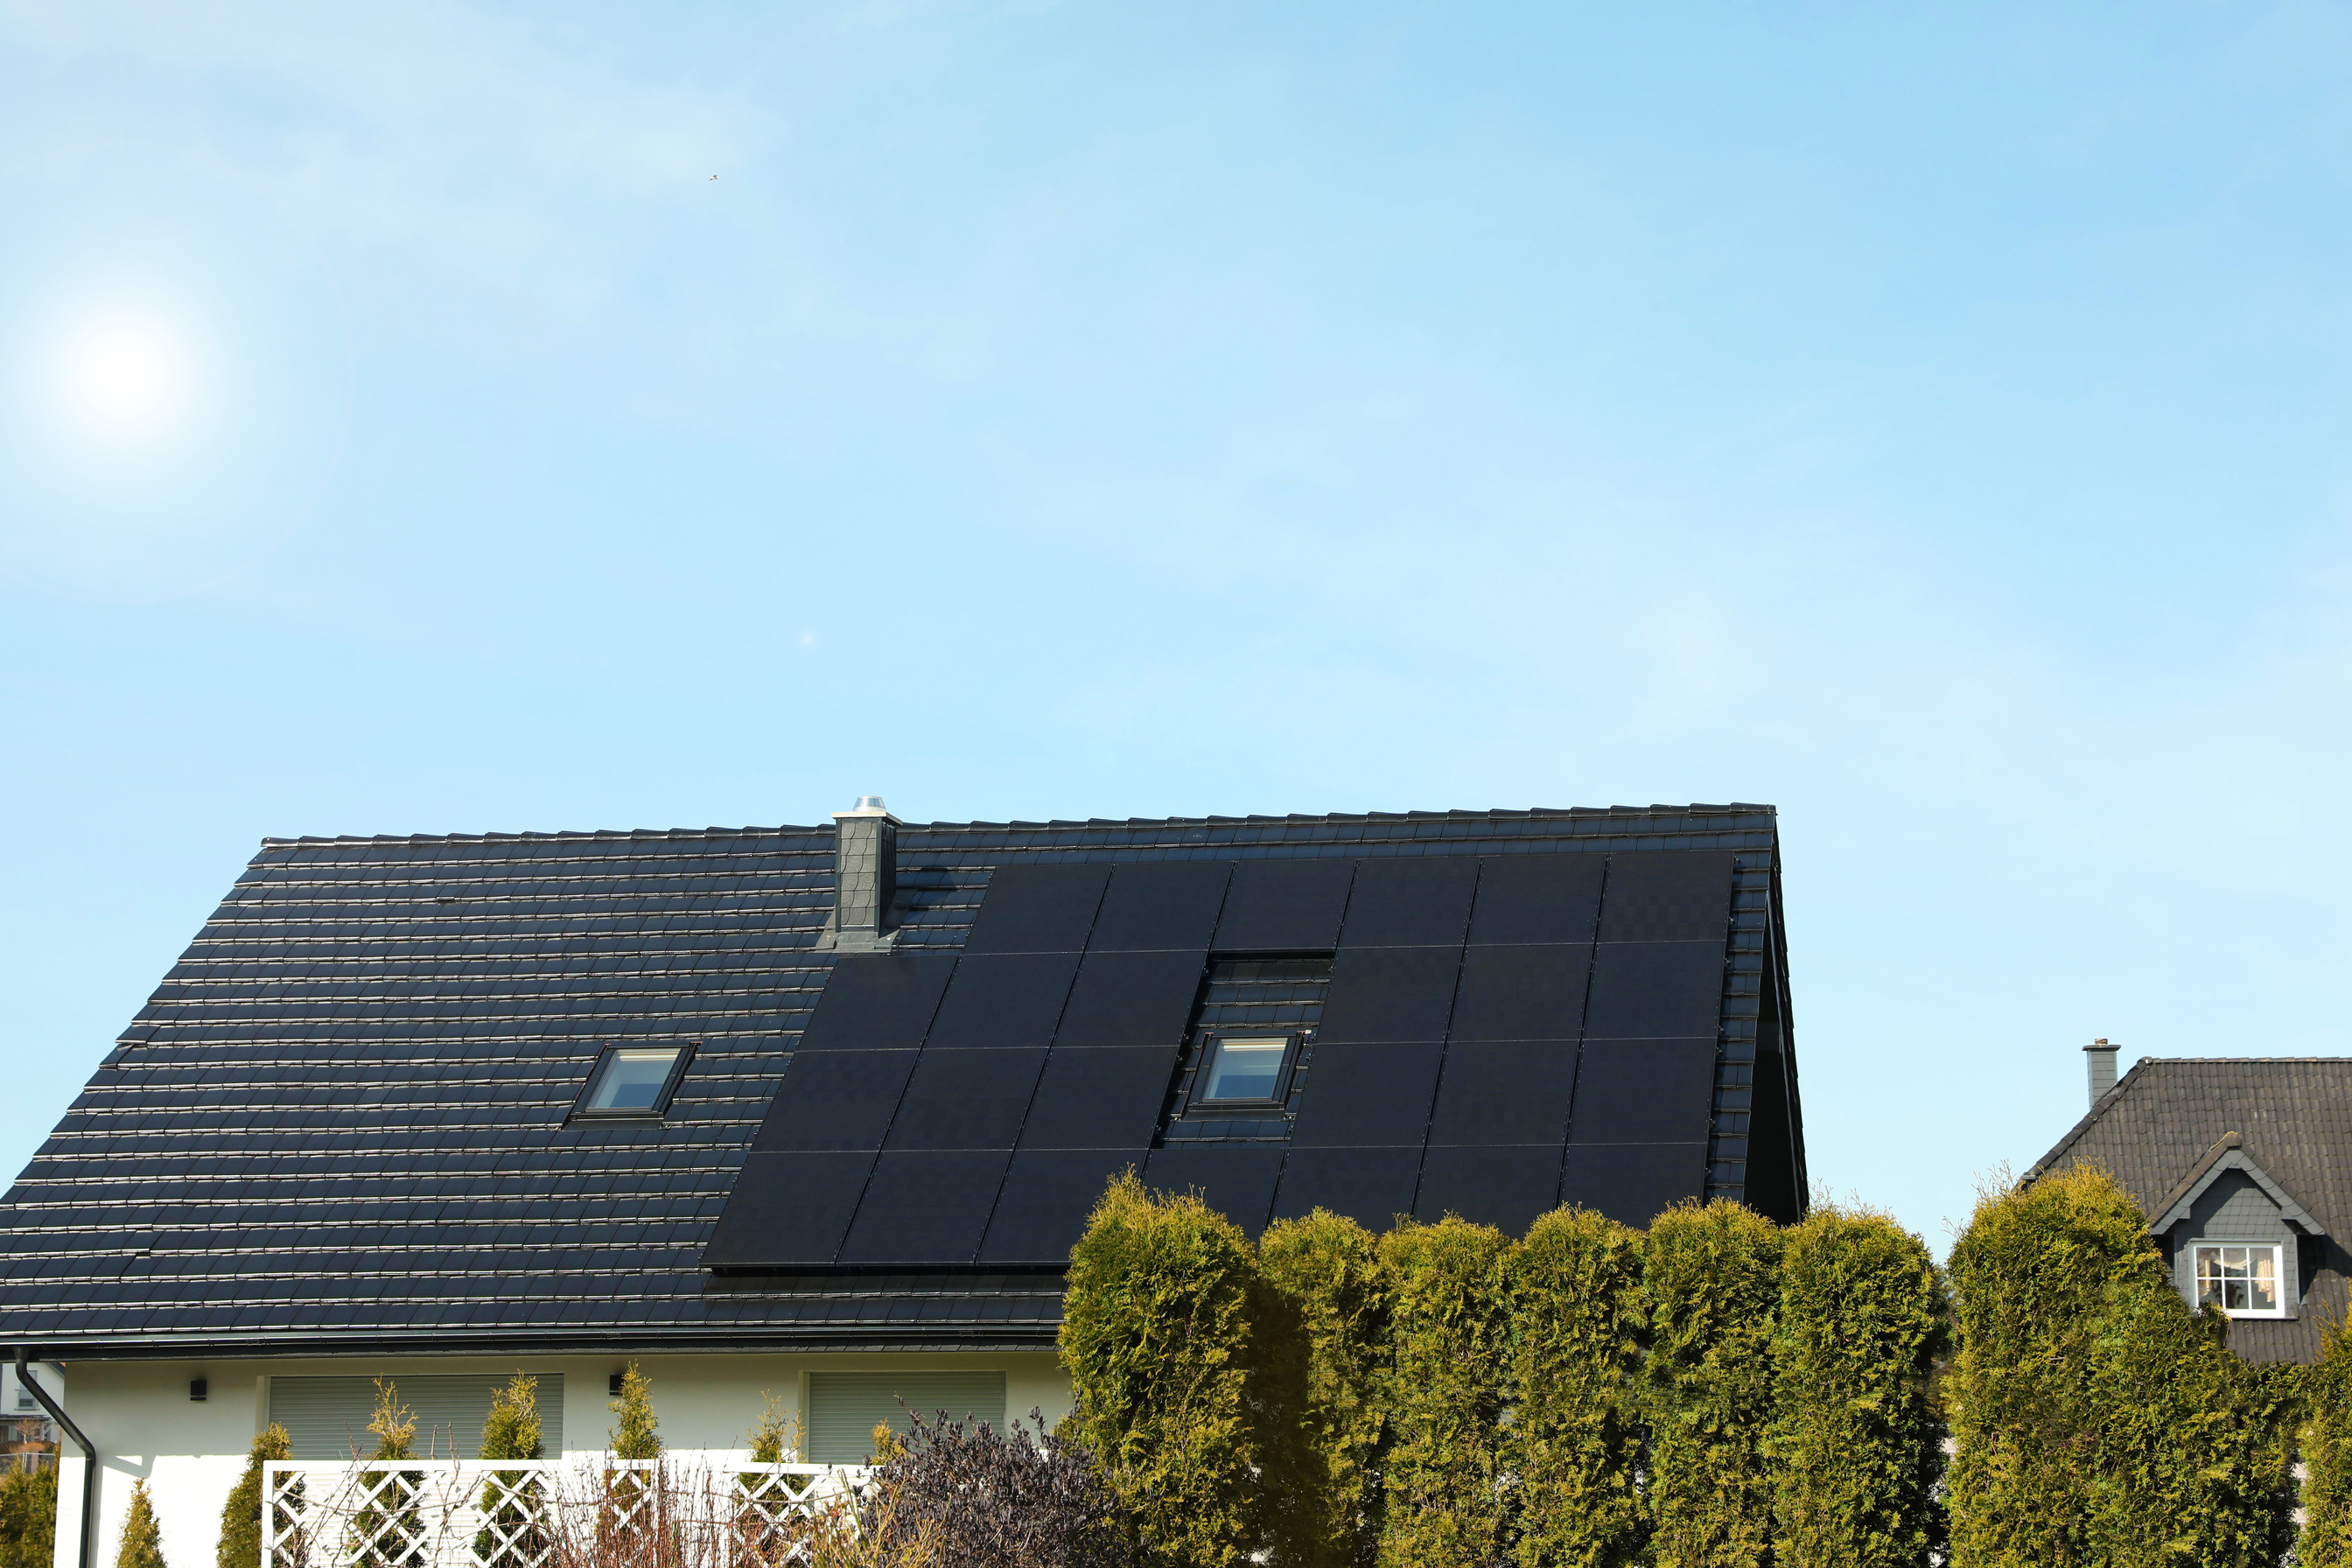 House with Installed Solar Panels on Roof. Alternative Energy